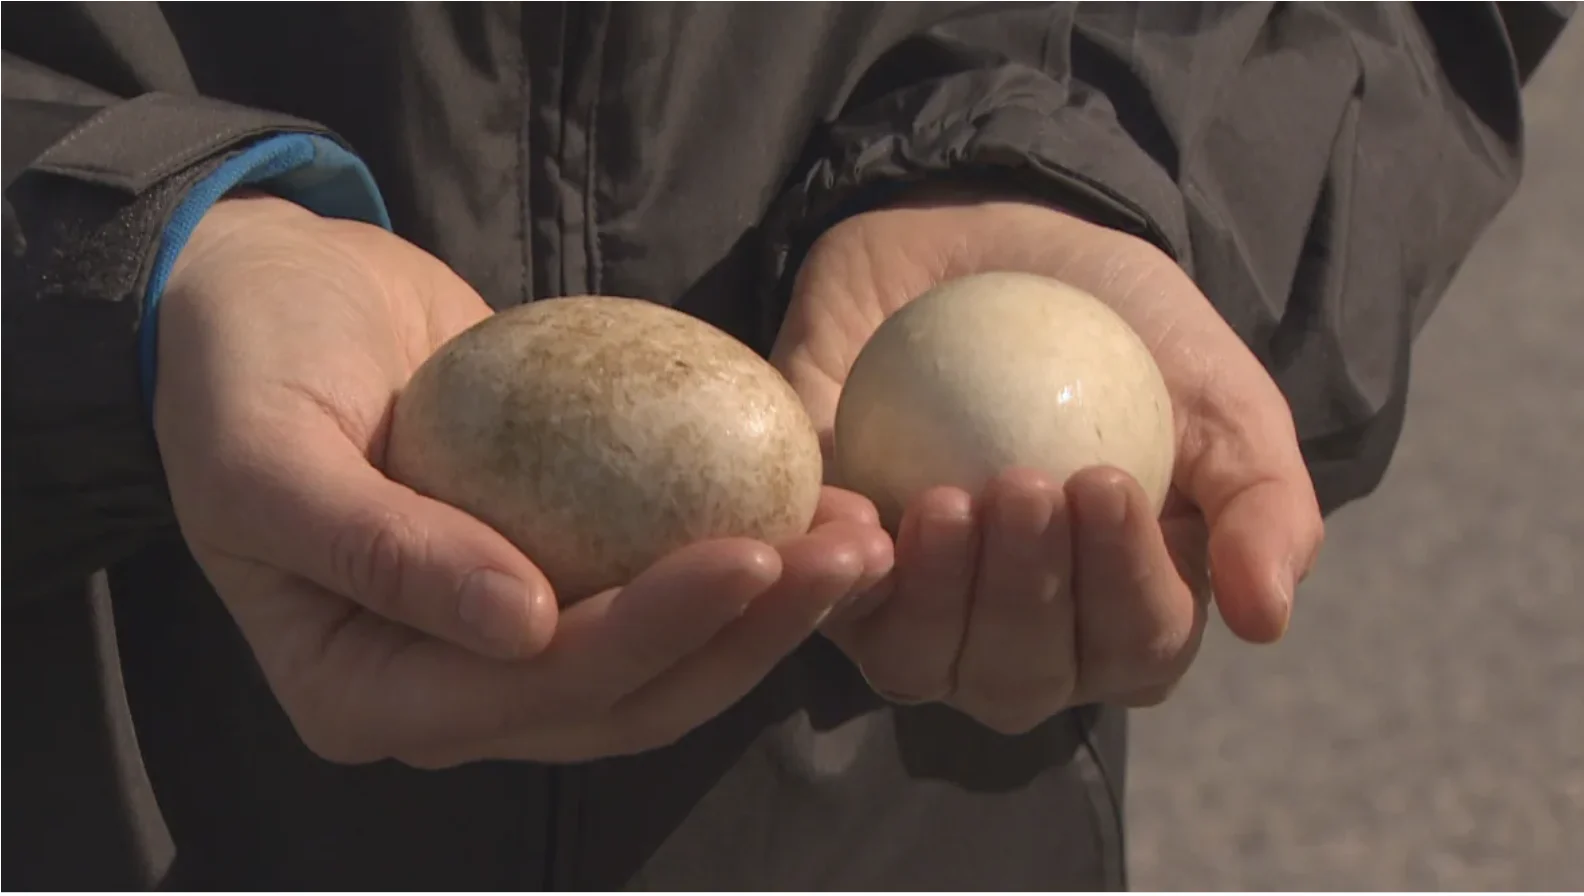 CBC: One method of trying to control the population of Canada geese used in Vancouver parks involves taking viable eggs from nests and switching them with frozen eggs. This is called egg addling. (Dillon Hodgin/CBC)